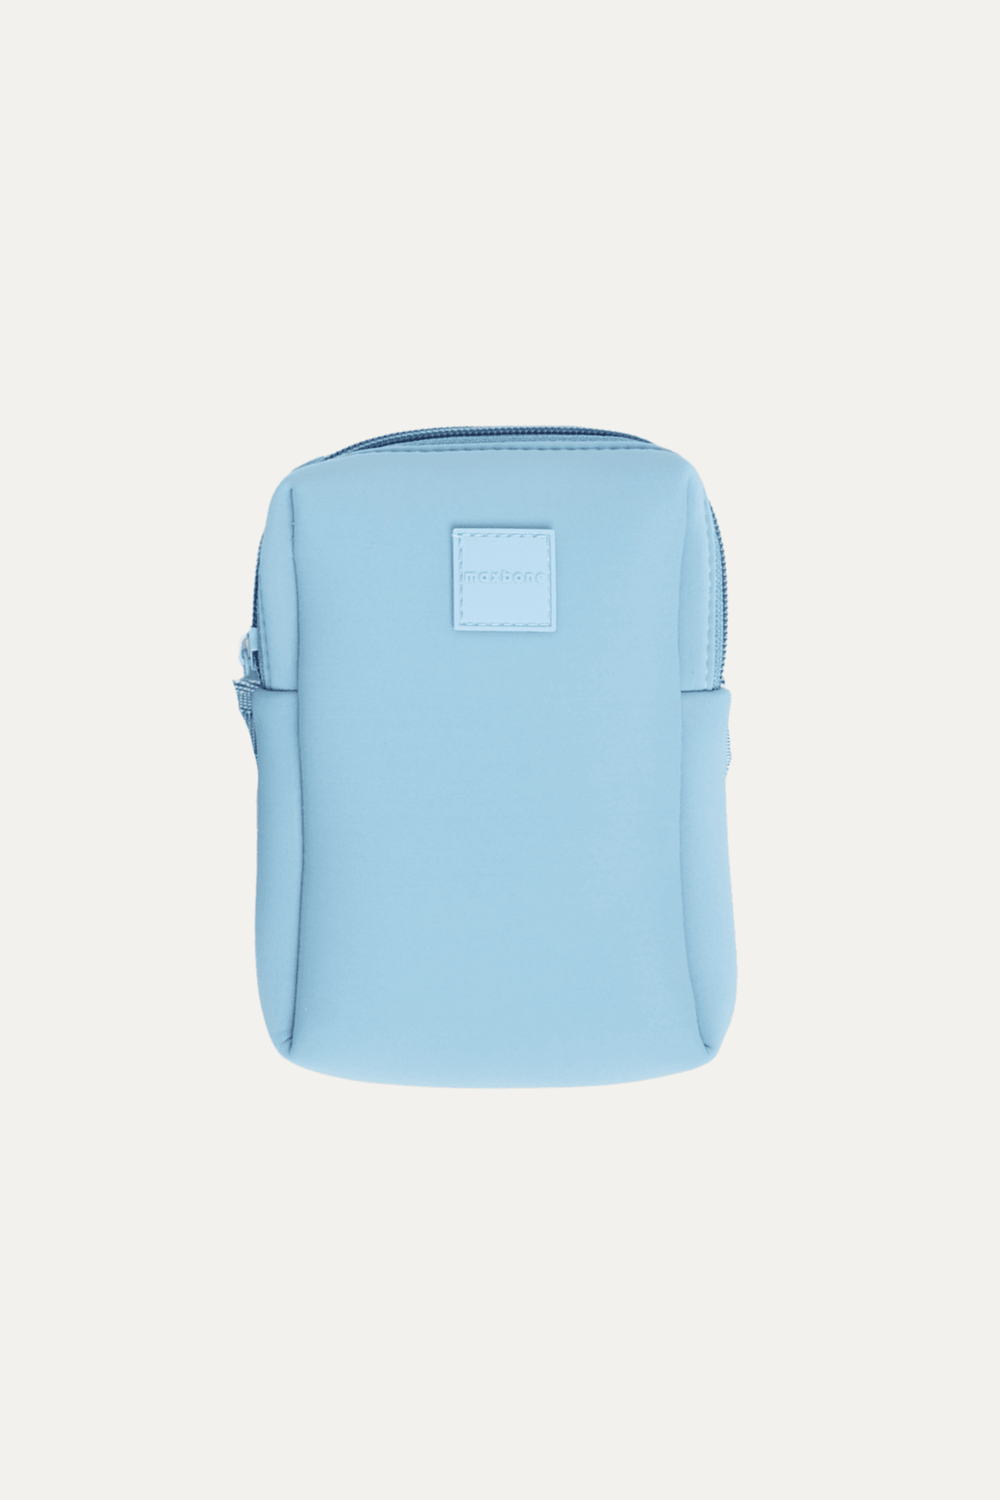 Go with Ease Pouch: Small / Dusk Blue